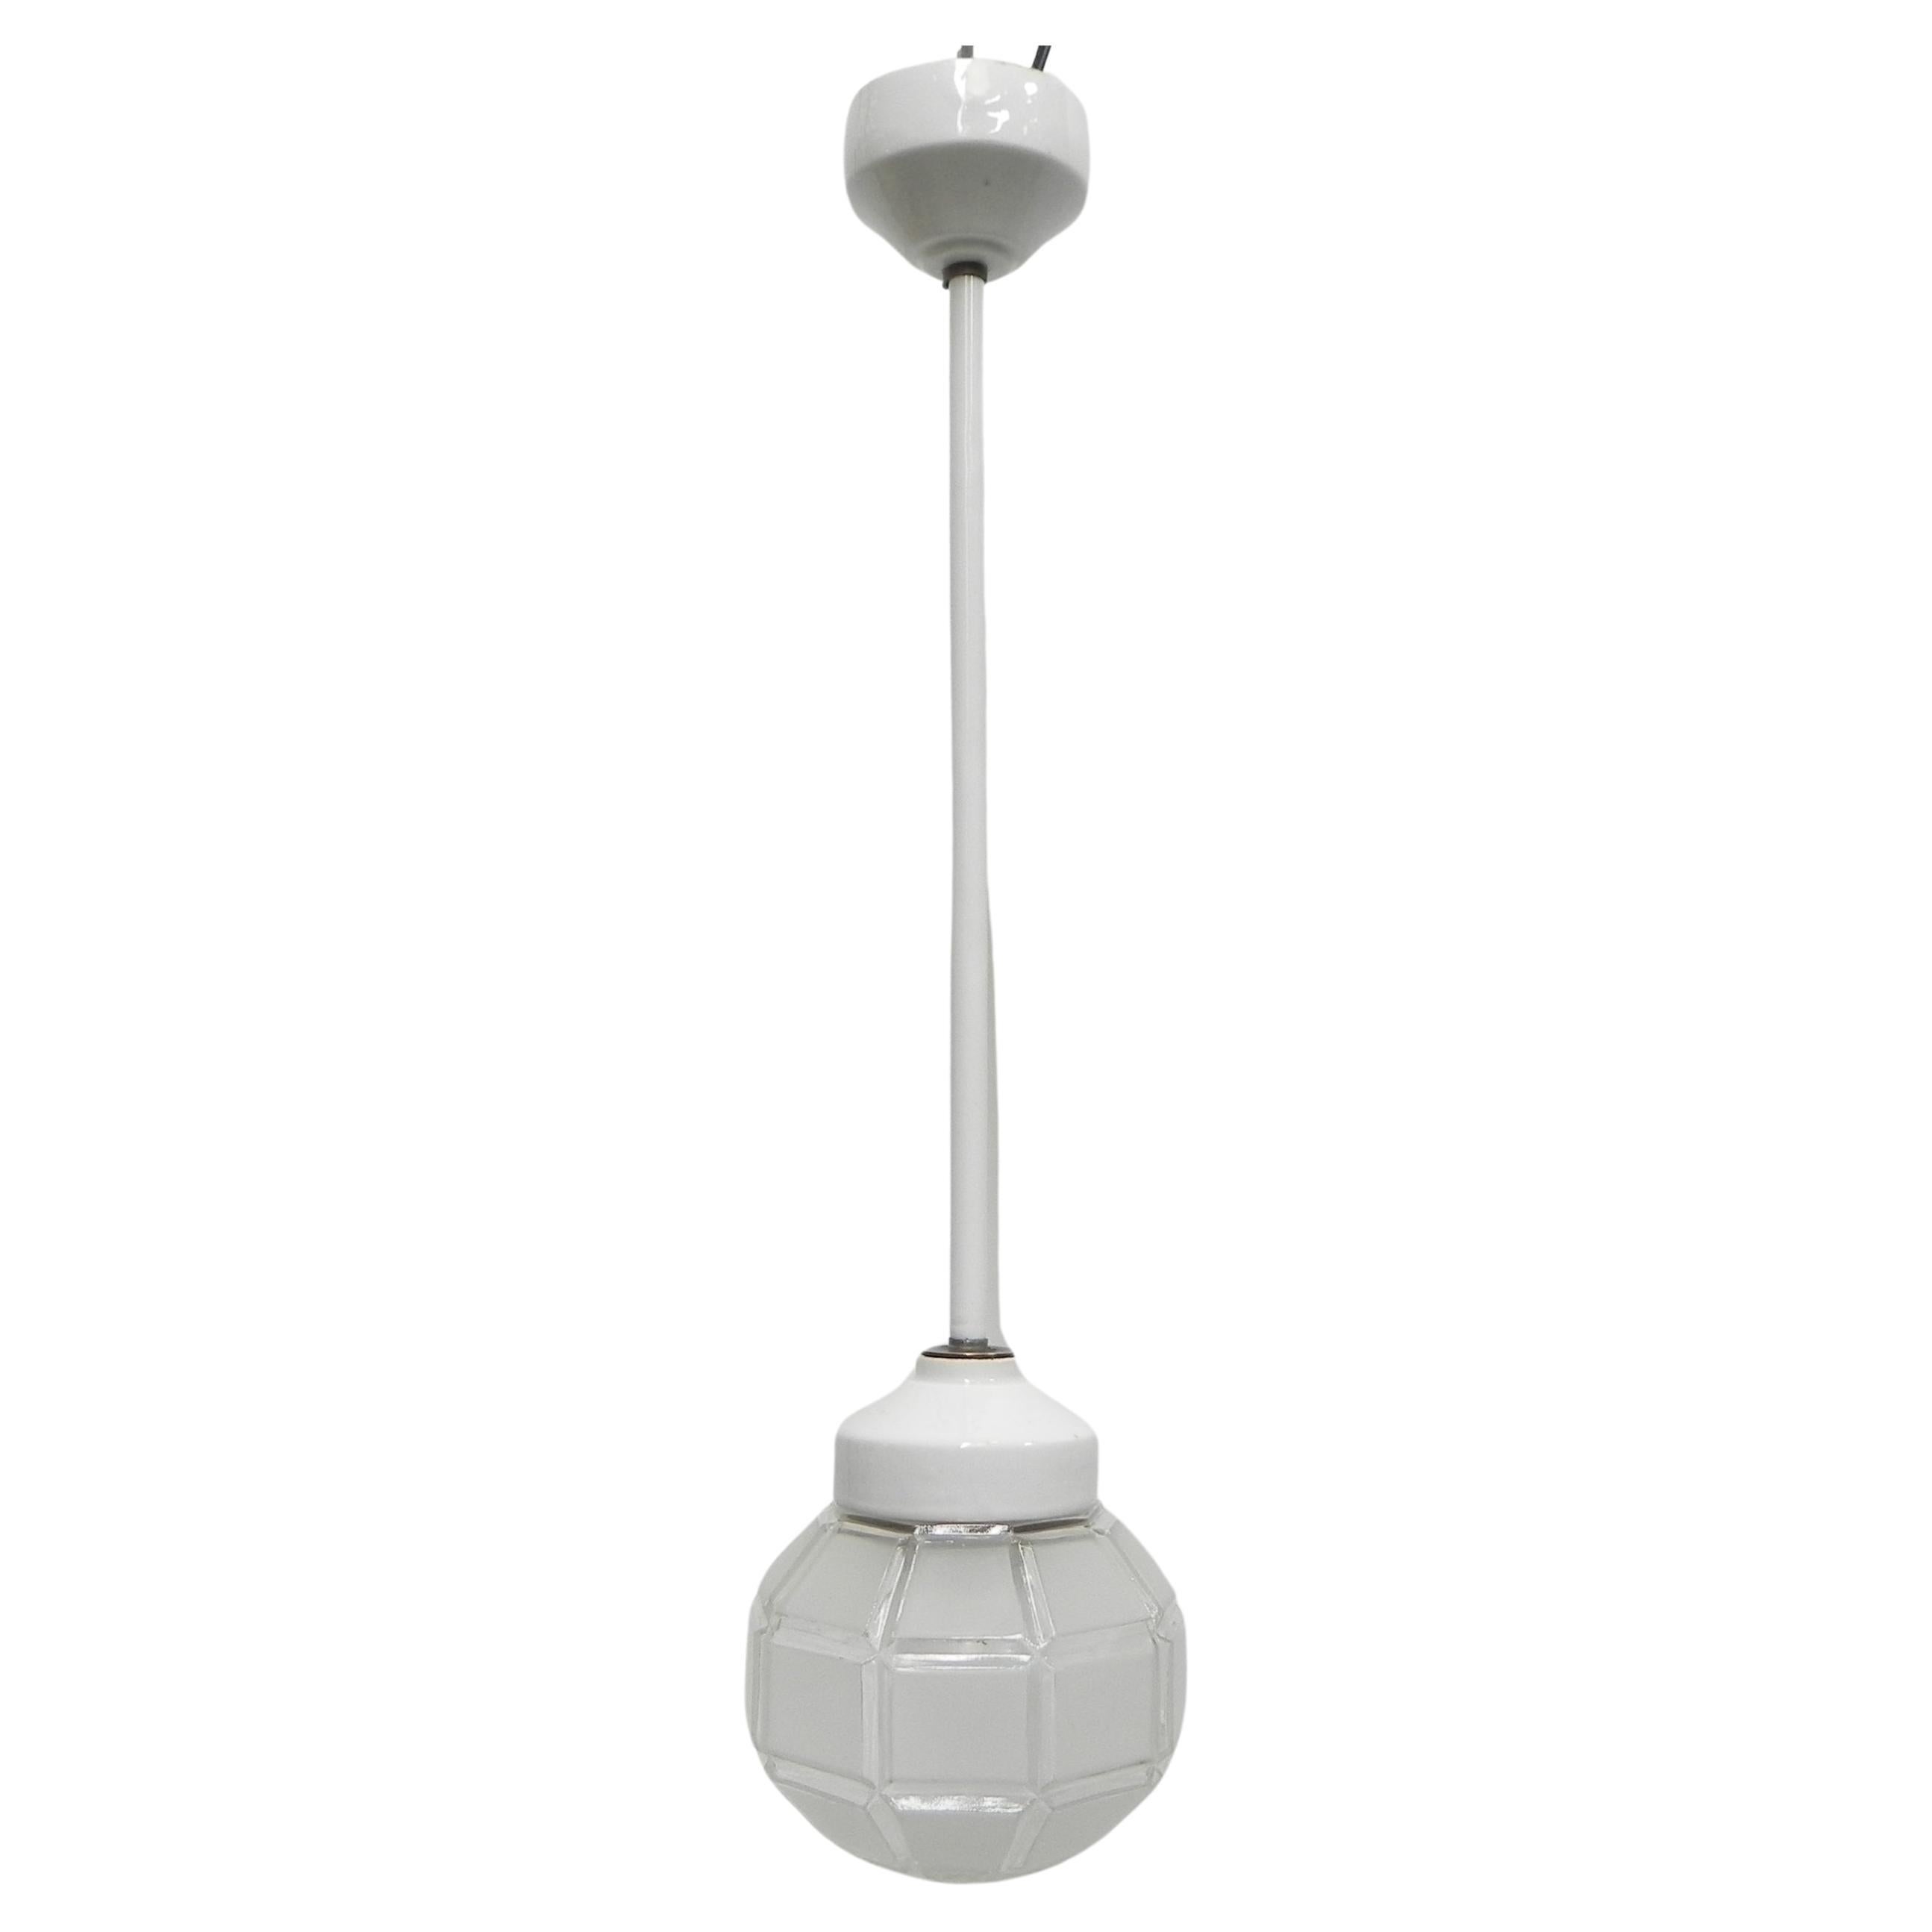 Art Deco hanging lamp with octagonal frosted glass shade